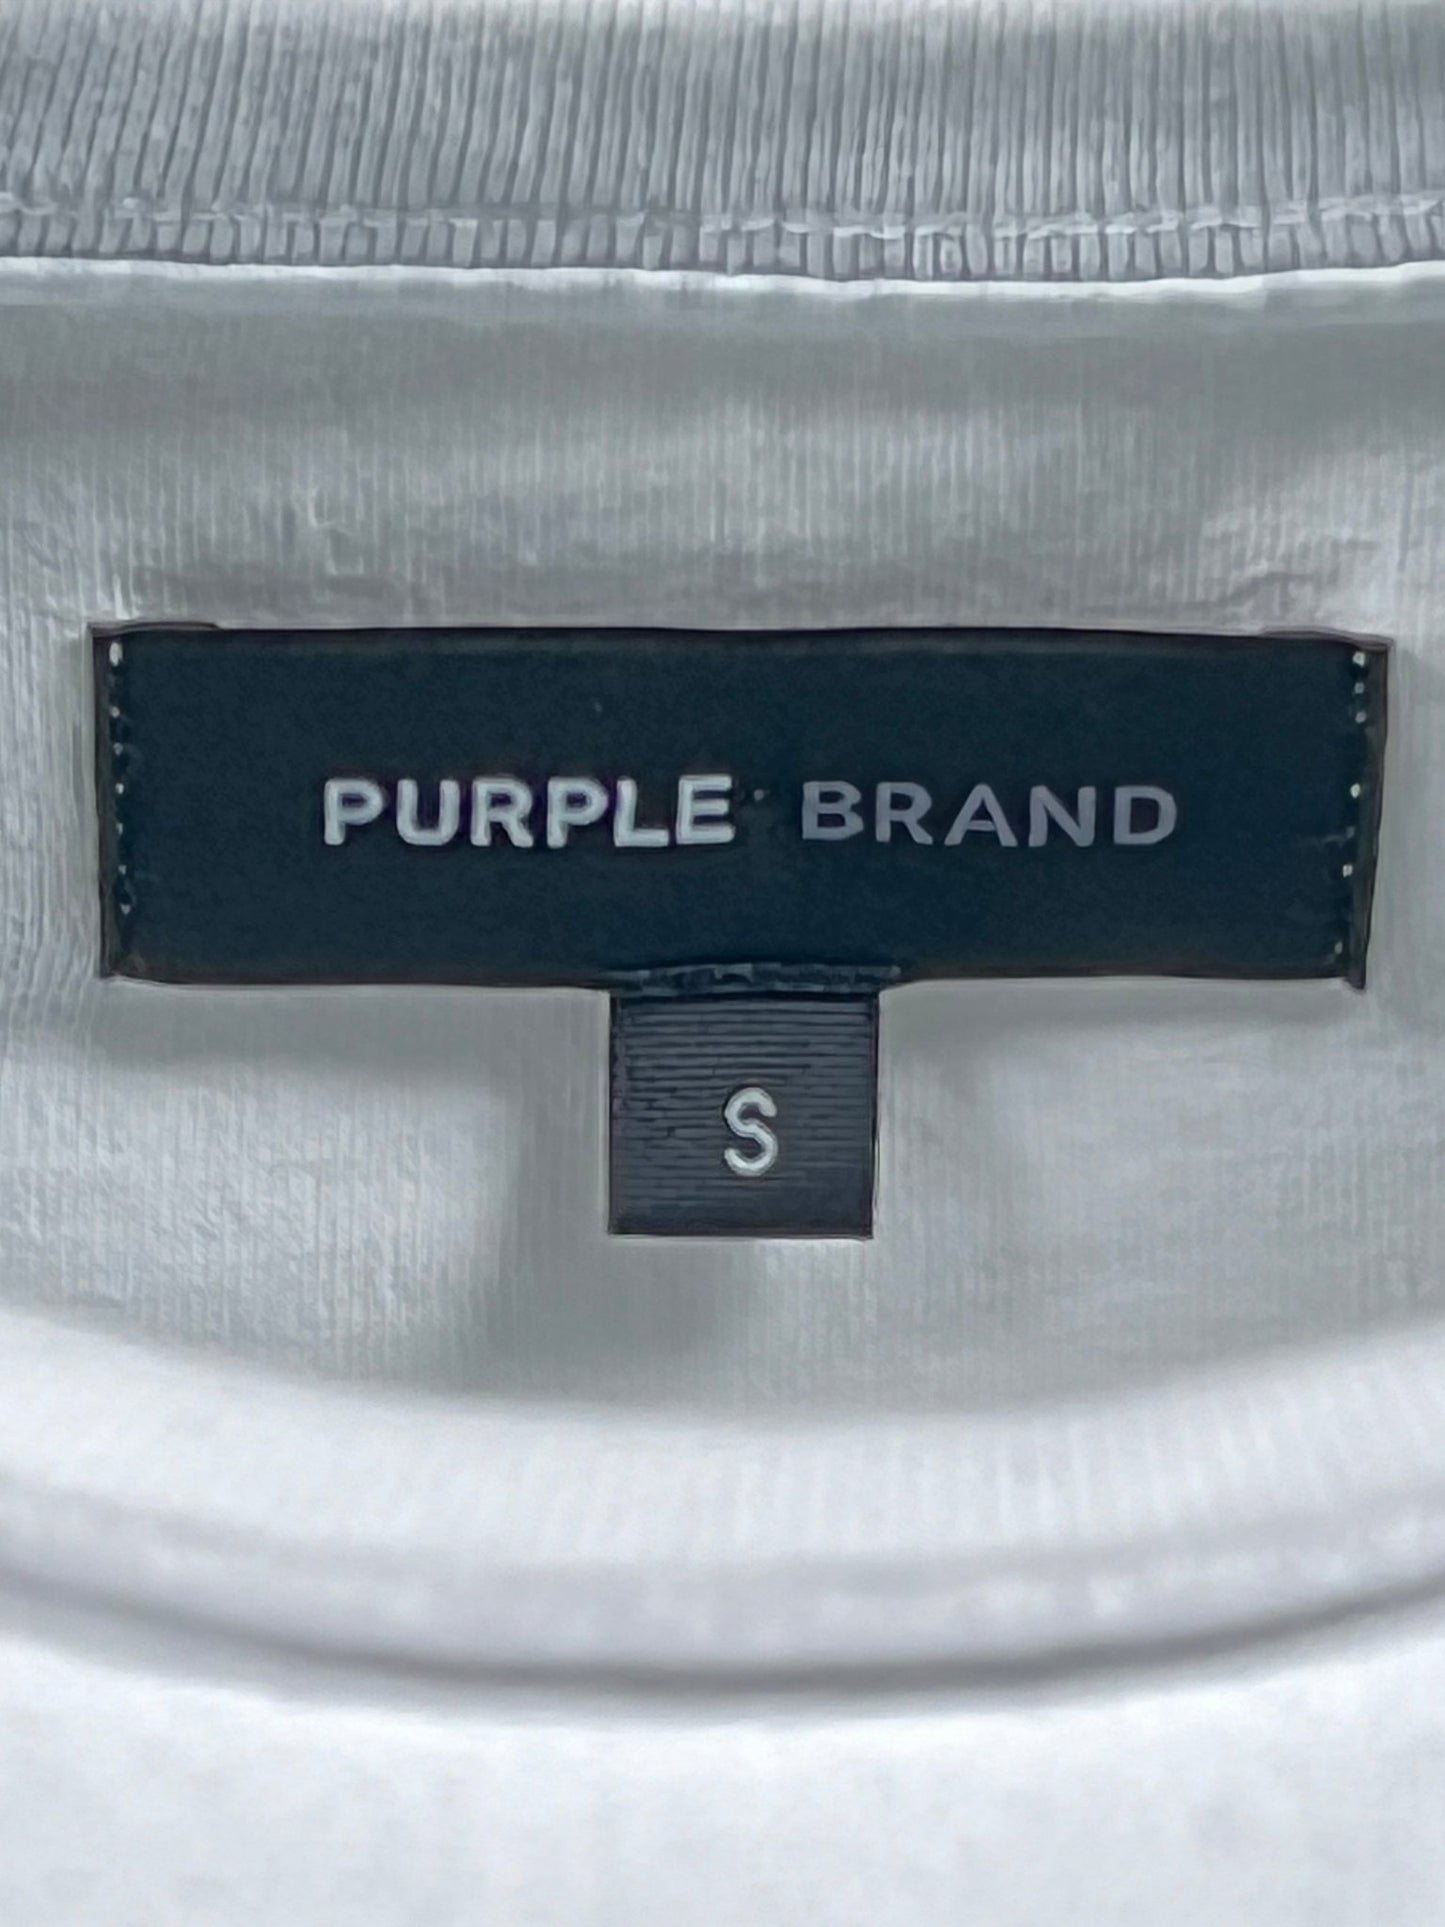 Close-up image of a clothing label with the text "PURPLE BRAND P101-JDBW TEXTURED NSIDE OUT TEE WHITE" in white on a dark tag and a smaller tag below it marked with size "S".